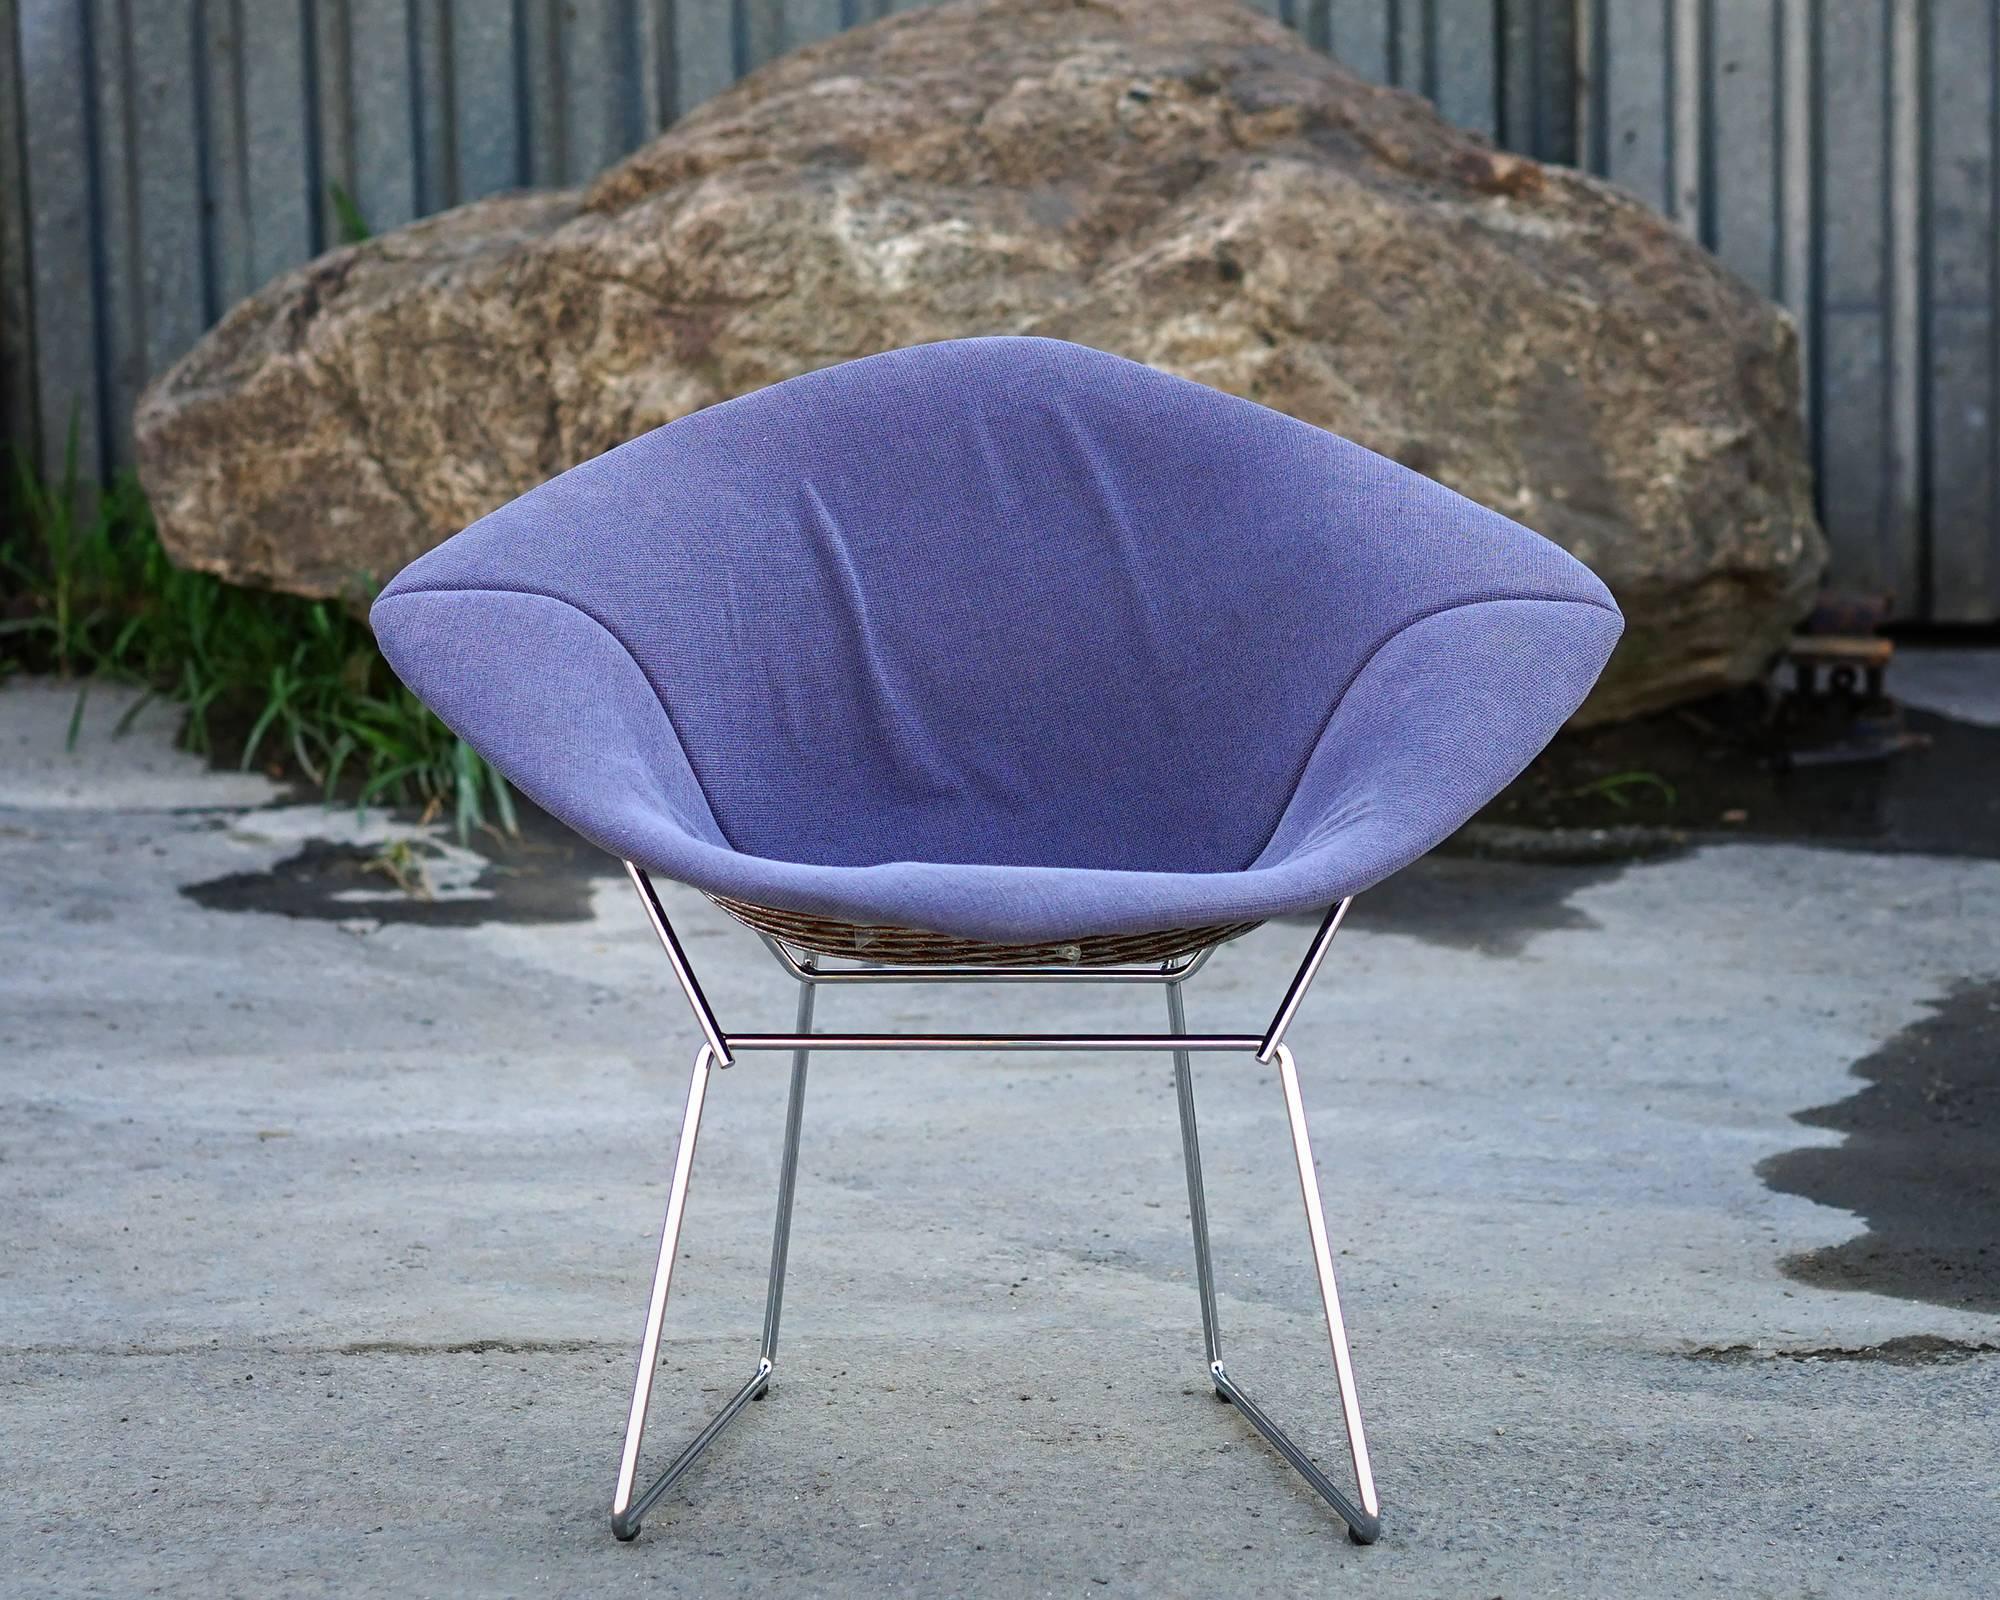 Authentic early production by Knoll, circa 1975-1985. A Mid-Century Modern Classic in fine, all original condition with original periwinkle upholstery.